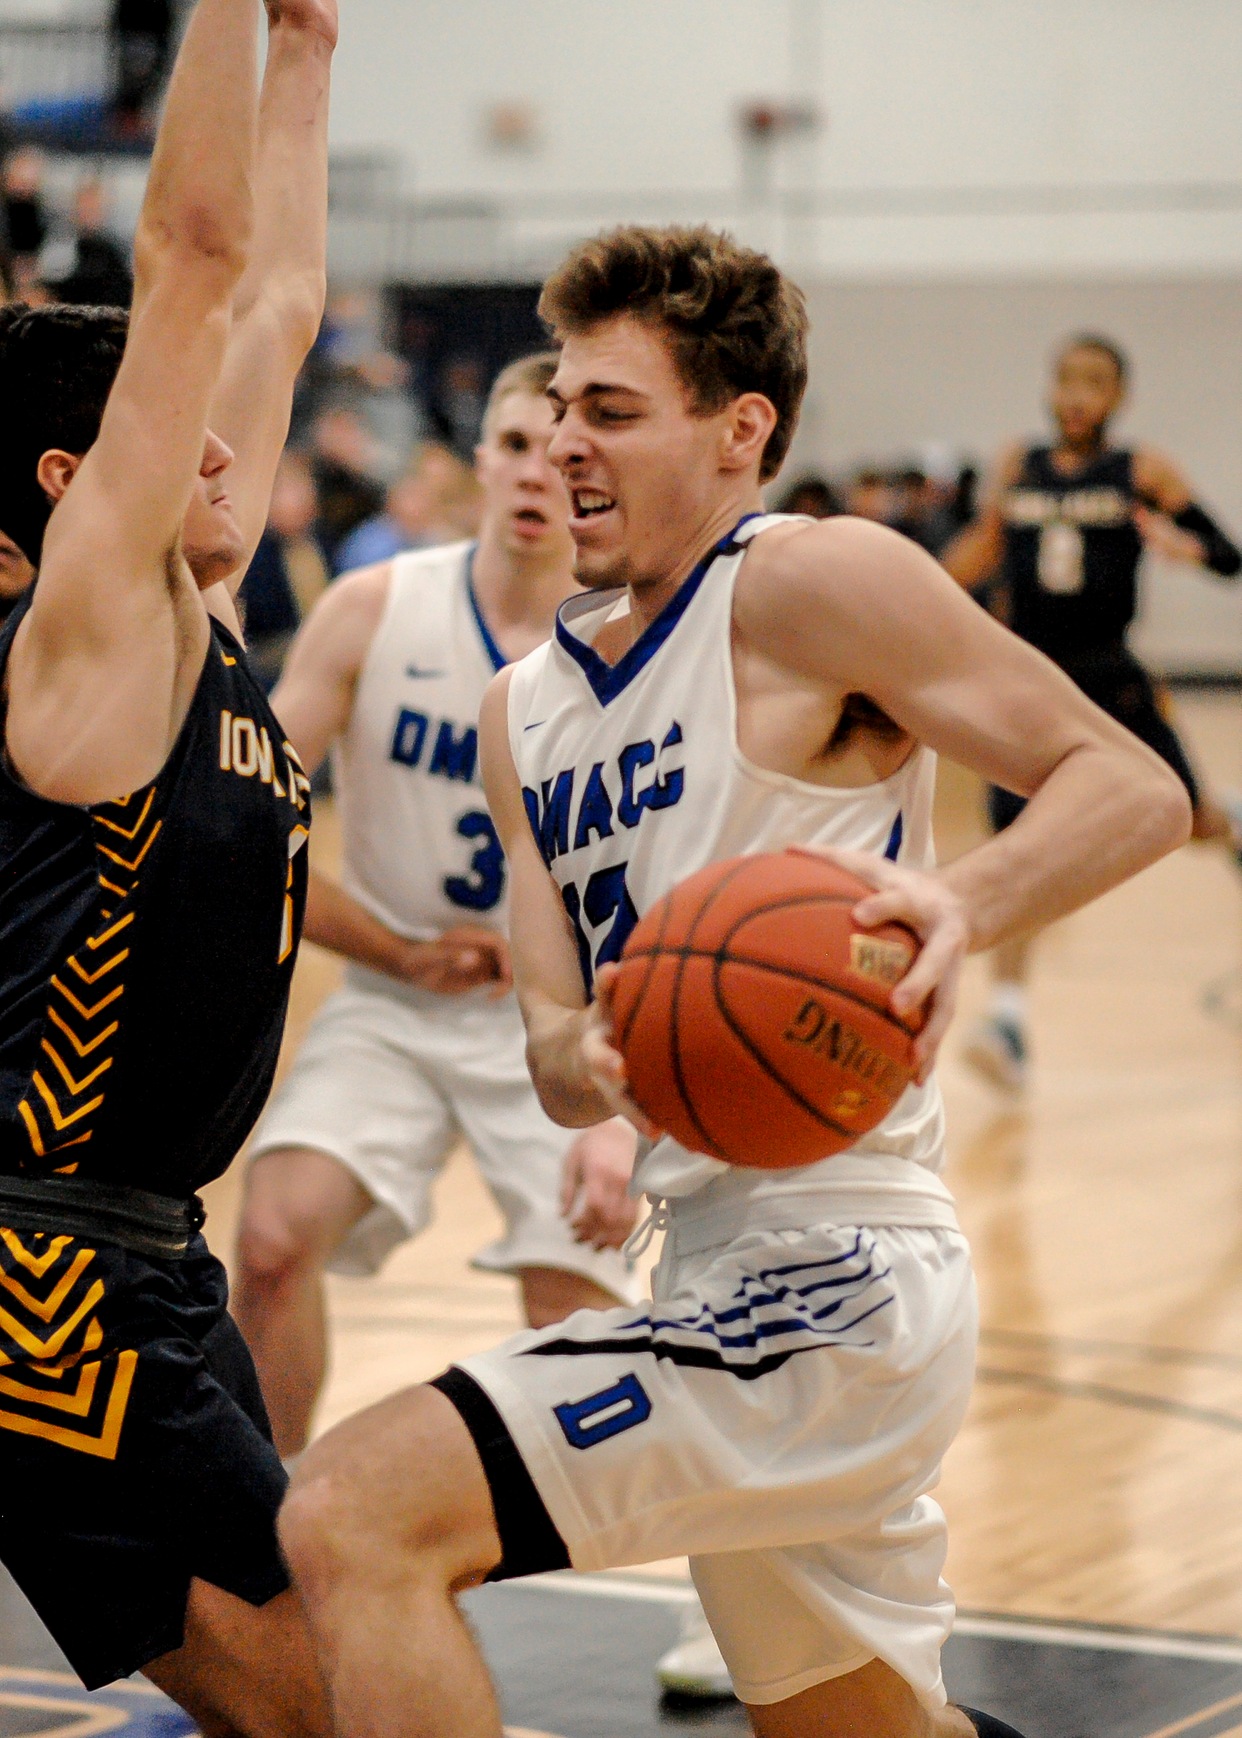 DMACC men's basketball team tops ILCC in regional semifinals; faces NIACC in championship game